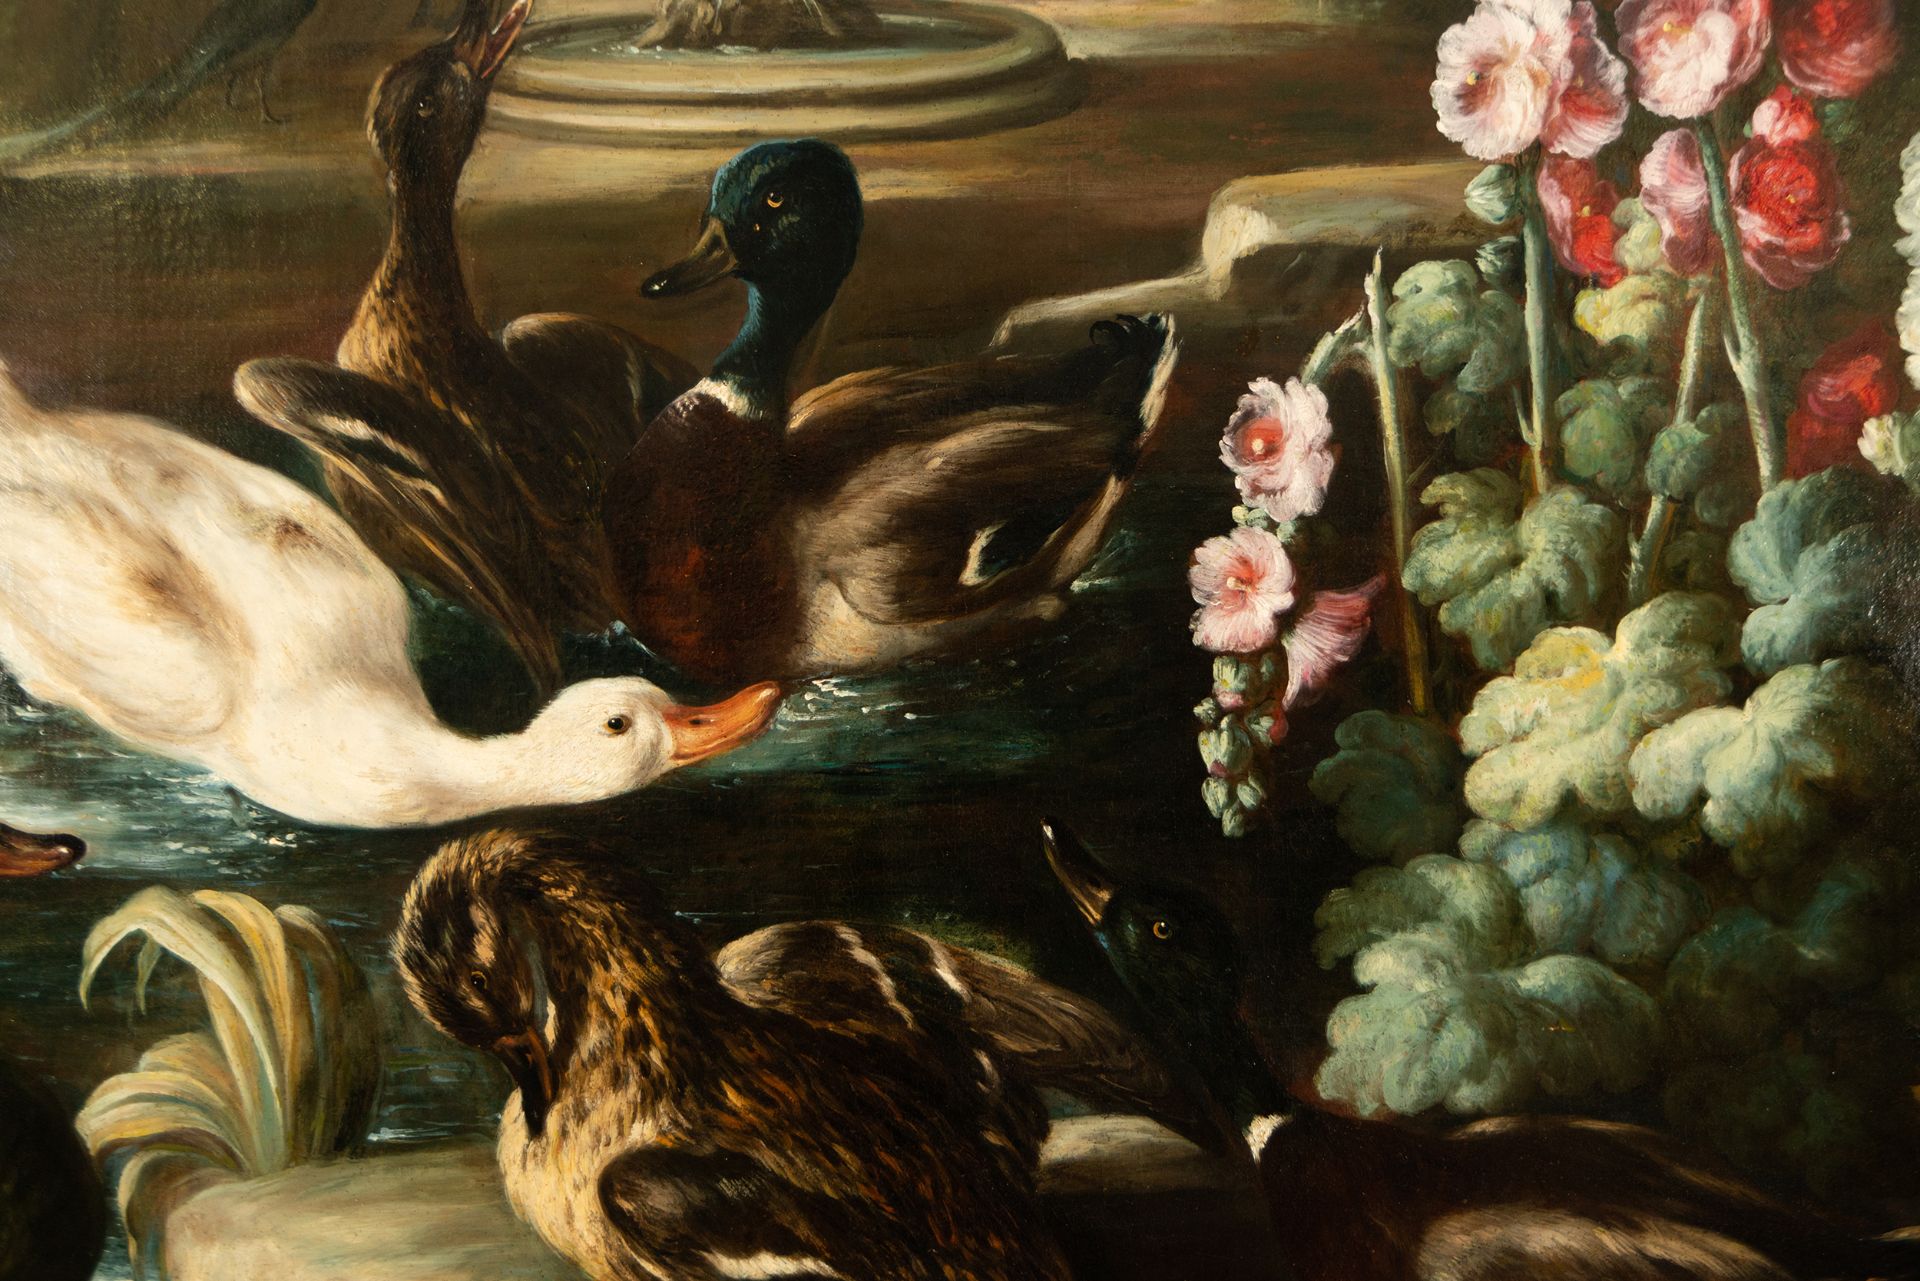 Large Pair of Still Lifes with Flowers and Birds in a Garden, 18th century Neapolitan school, Circle - Image 14 of 17